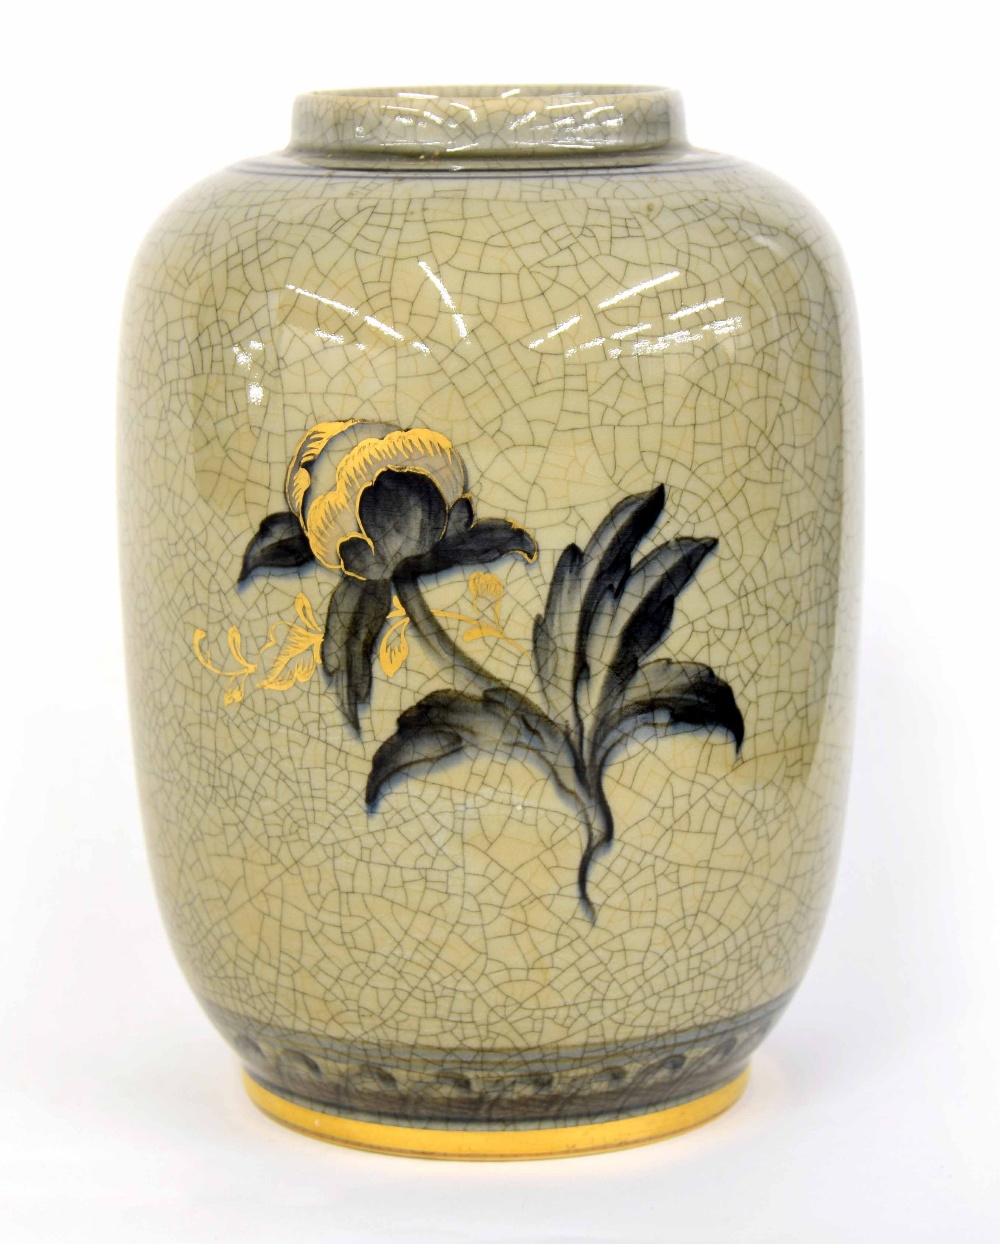 Royal Copenhagen - Crackle vase model 888, decorated with gilt highlighted flowers, factory stamp - Image 2 of 3